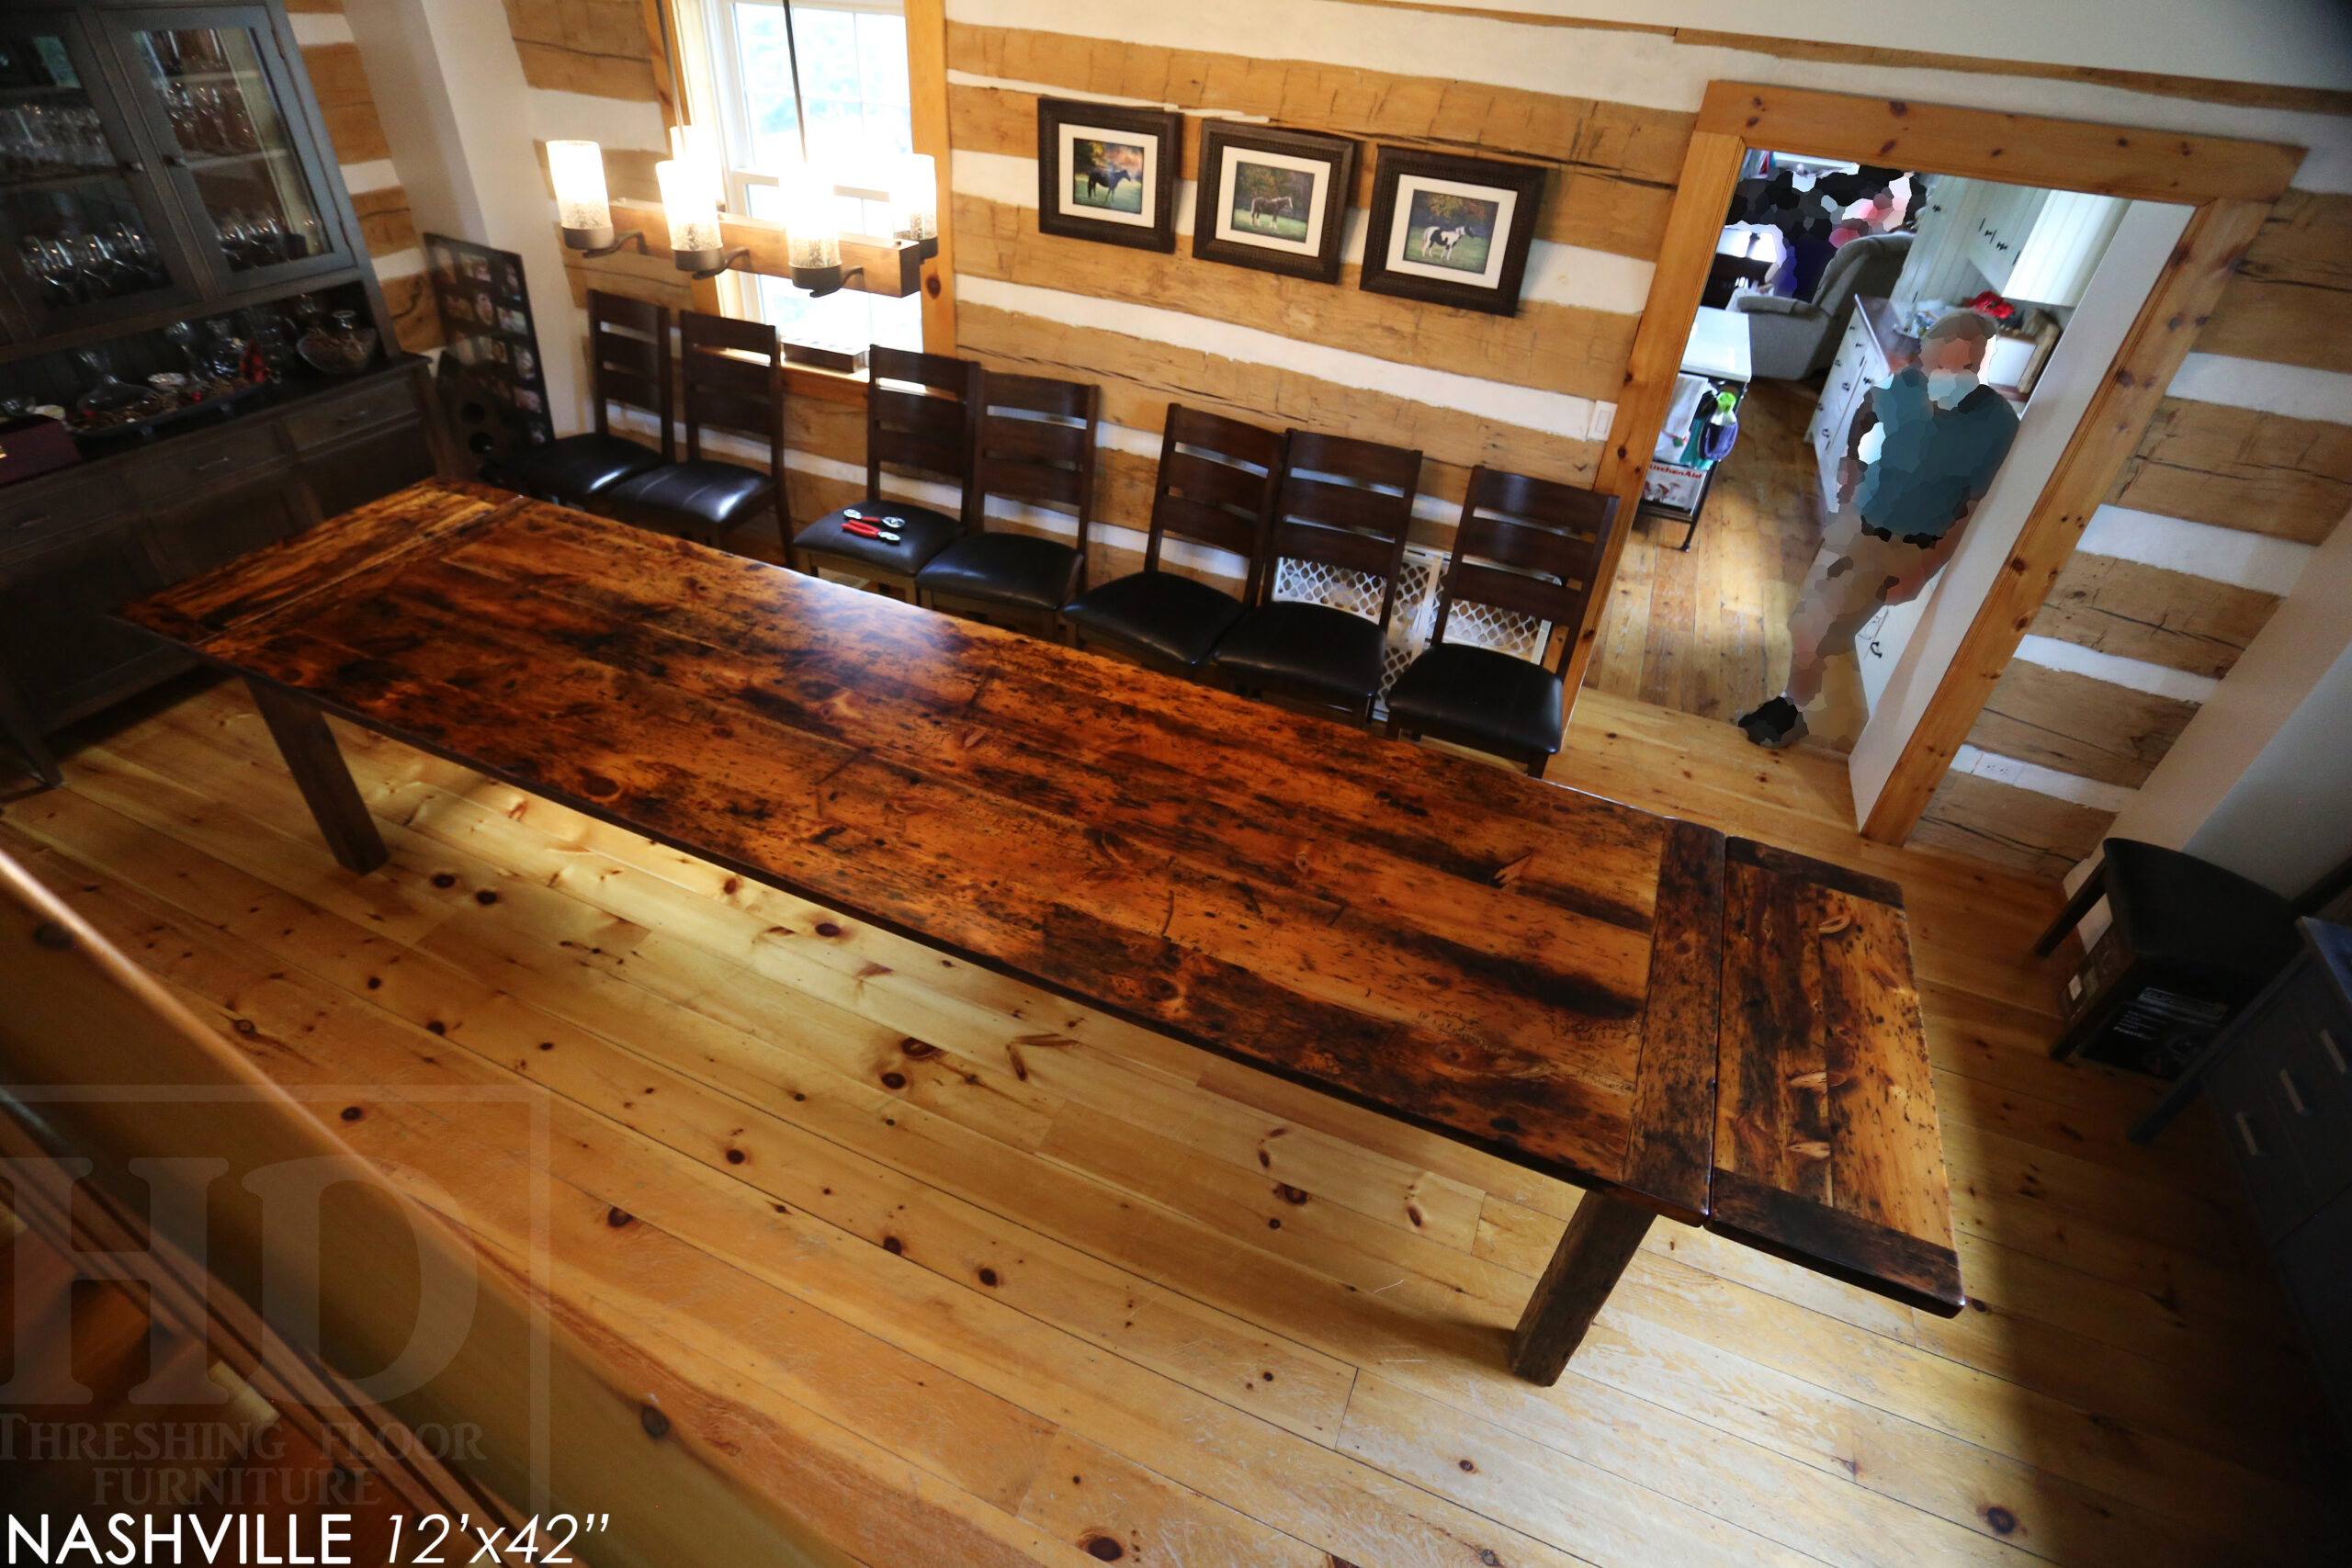 12' Ontario Barnwood Harvest Table we made for a Bolton, Ontario home - 42" wide - Original edges & distressing maintained - Old growth Pine Threshing Floor 2" Top - Straight 4"x4" Windbrace Beam Legs - Two 15" Leaf Extensions [making total length 174" when extended] - Premium epoxy + satin polyurethane finish - www.table.ca